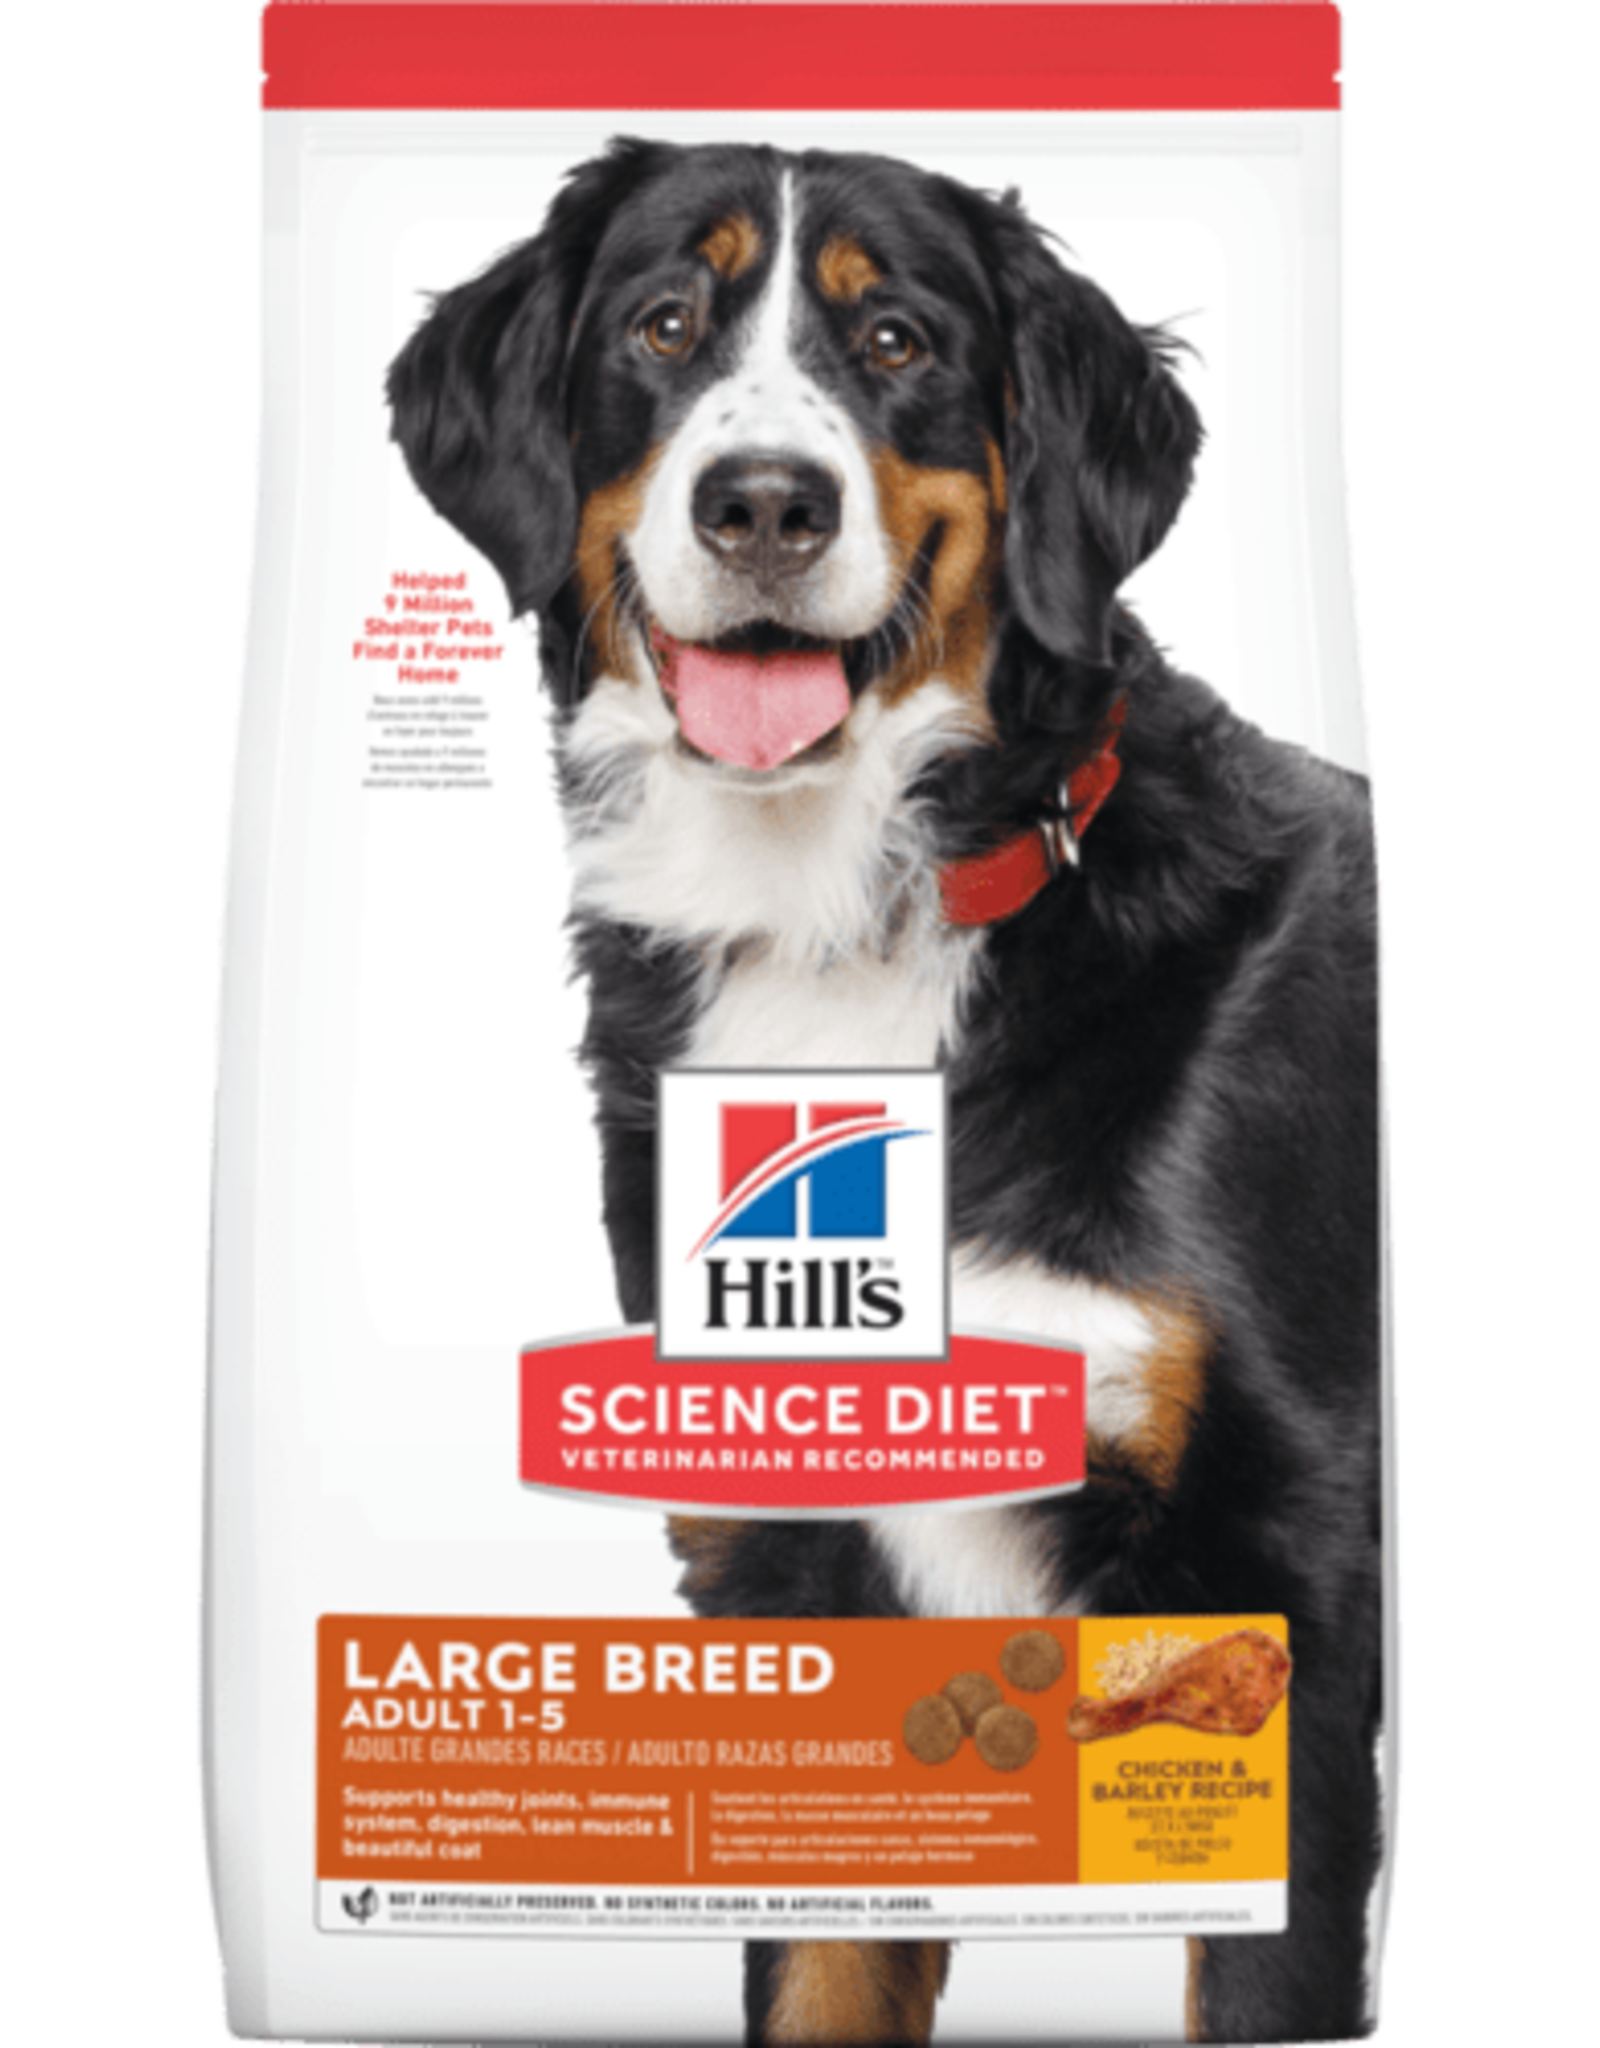 SCIENCE DIET HILL'S SCIENCE DIET CANINE ADULT LARGE BREED 35LBS